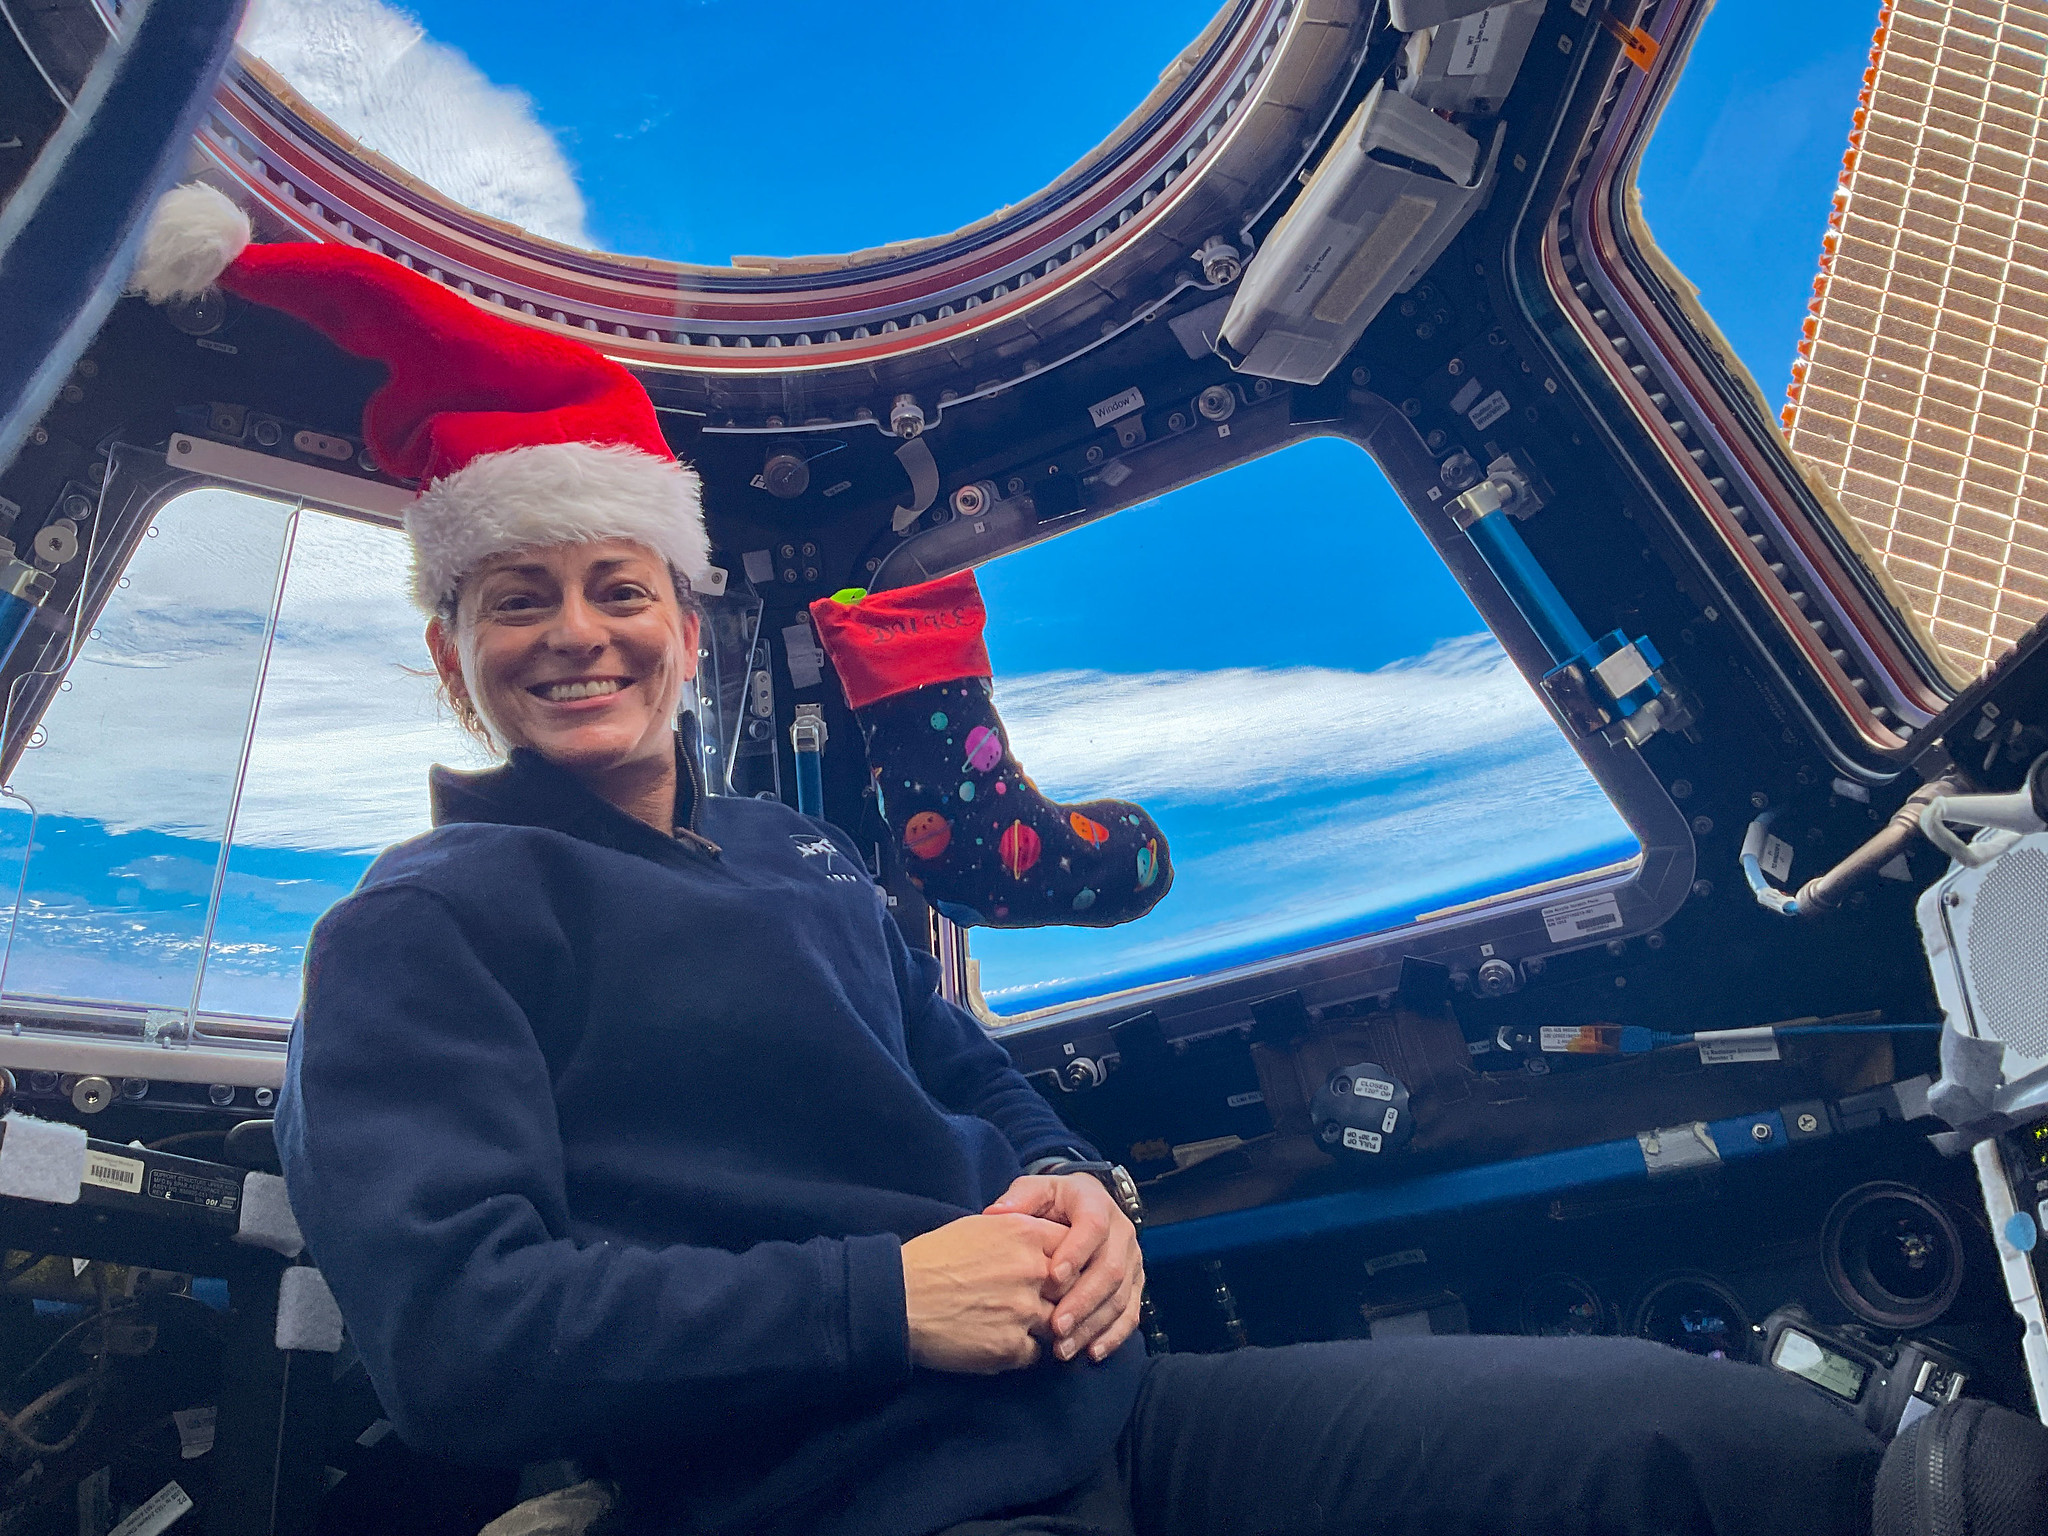 NASA astronaut Nicole Mann, wearing a Santa hat, poses in front of the Cupola of the International Space Station.